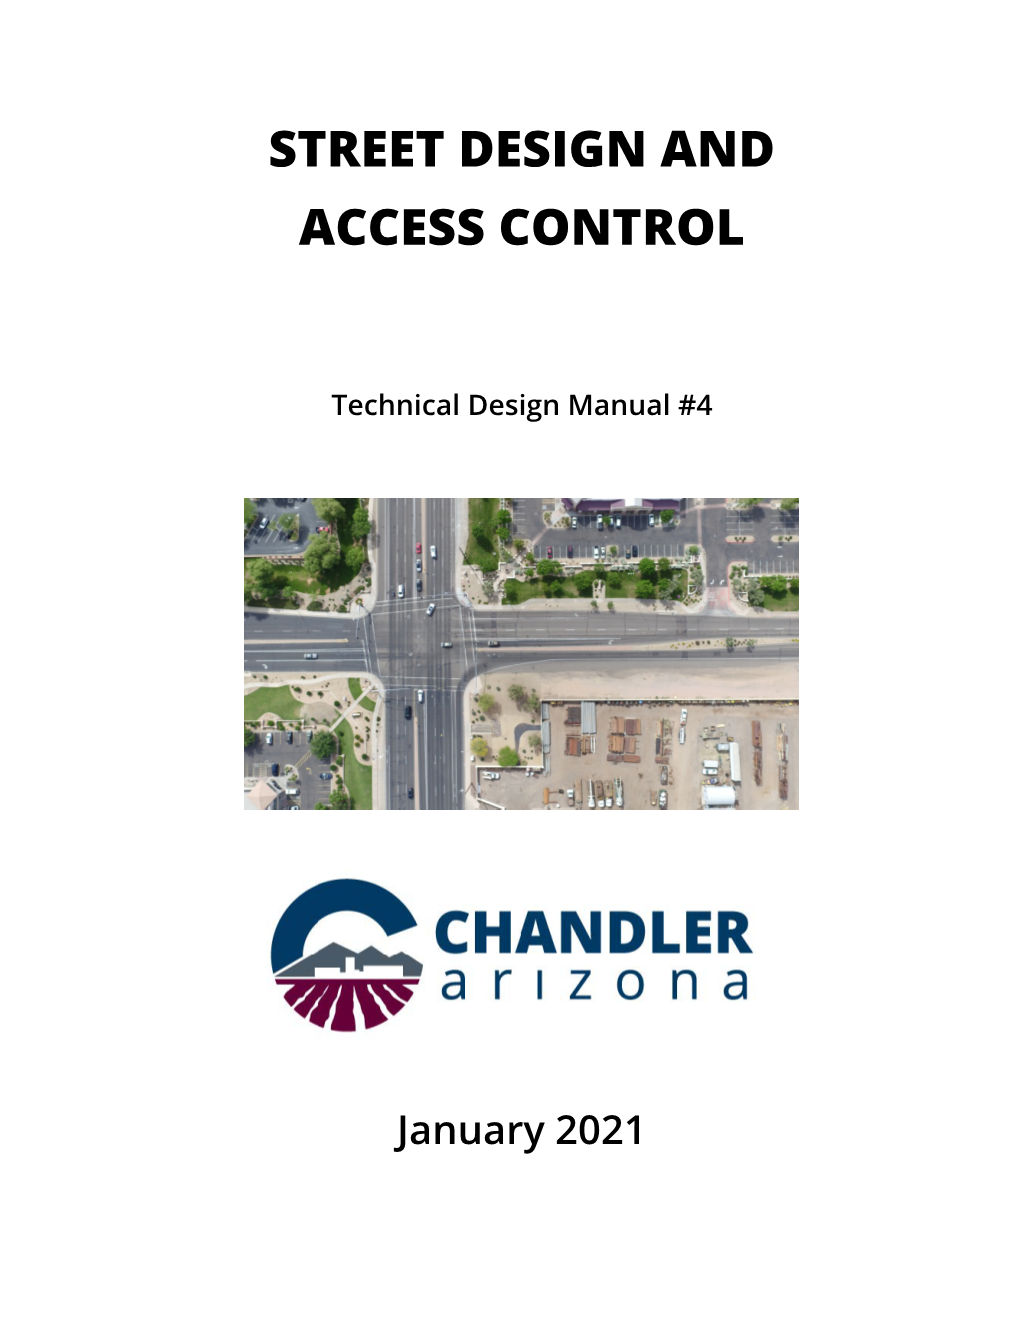 Street Design and Access Control